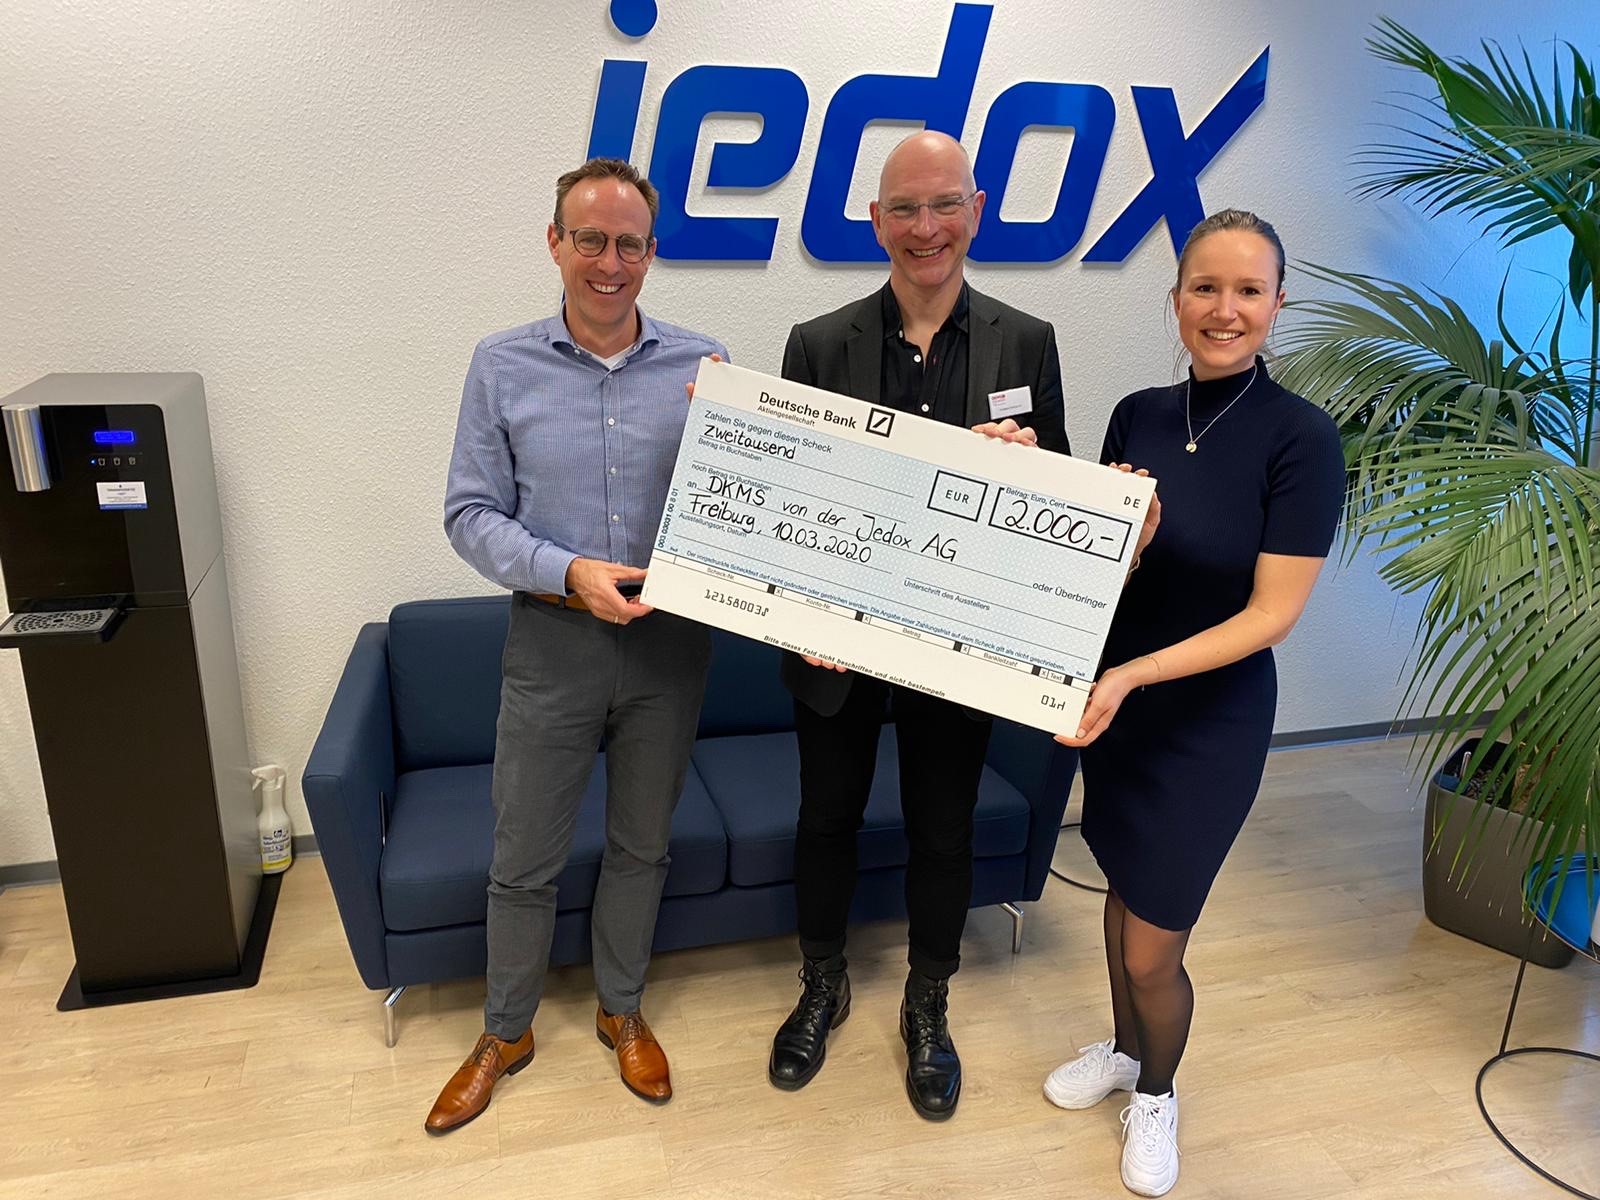 Florian Winterstein, Jedox CEO and Lena Dierolf, Director of Global Marketing, hand over the check for 2,000 euros to Prof. Dr. Thomas Stieglitz, donating member at DKMS.